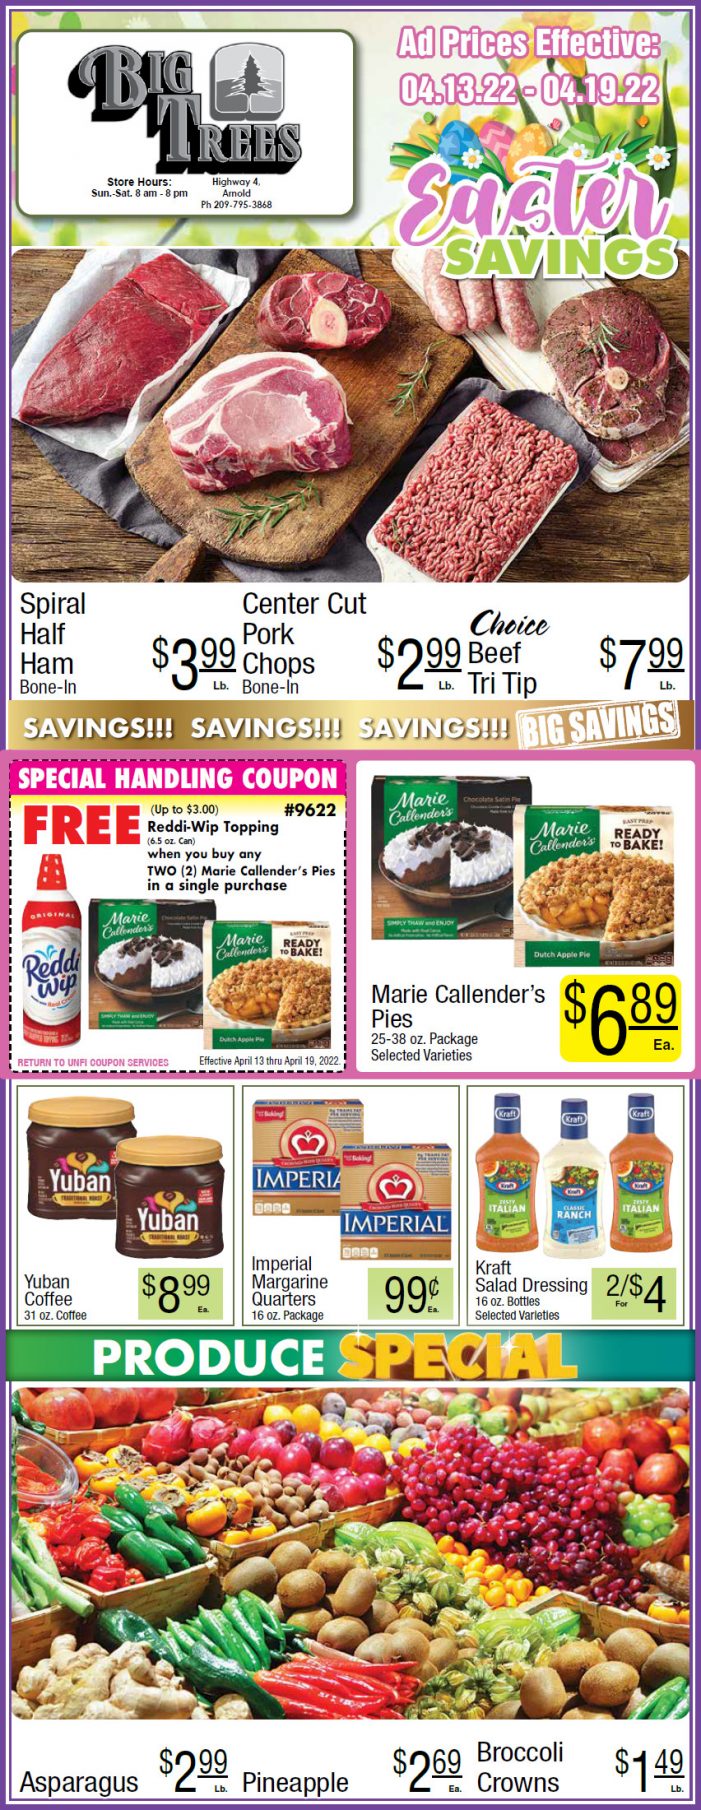 Big Trees Market Weekly Ad & Grocery Specials April 13th Through April 19th! Shop Local & Save!